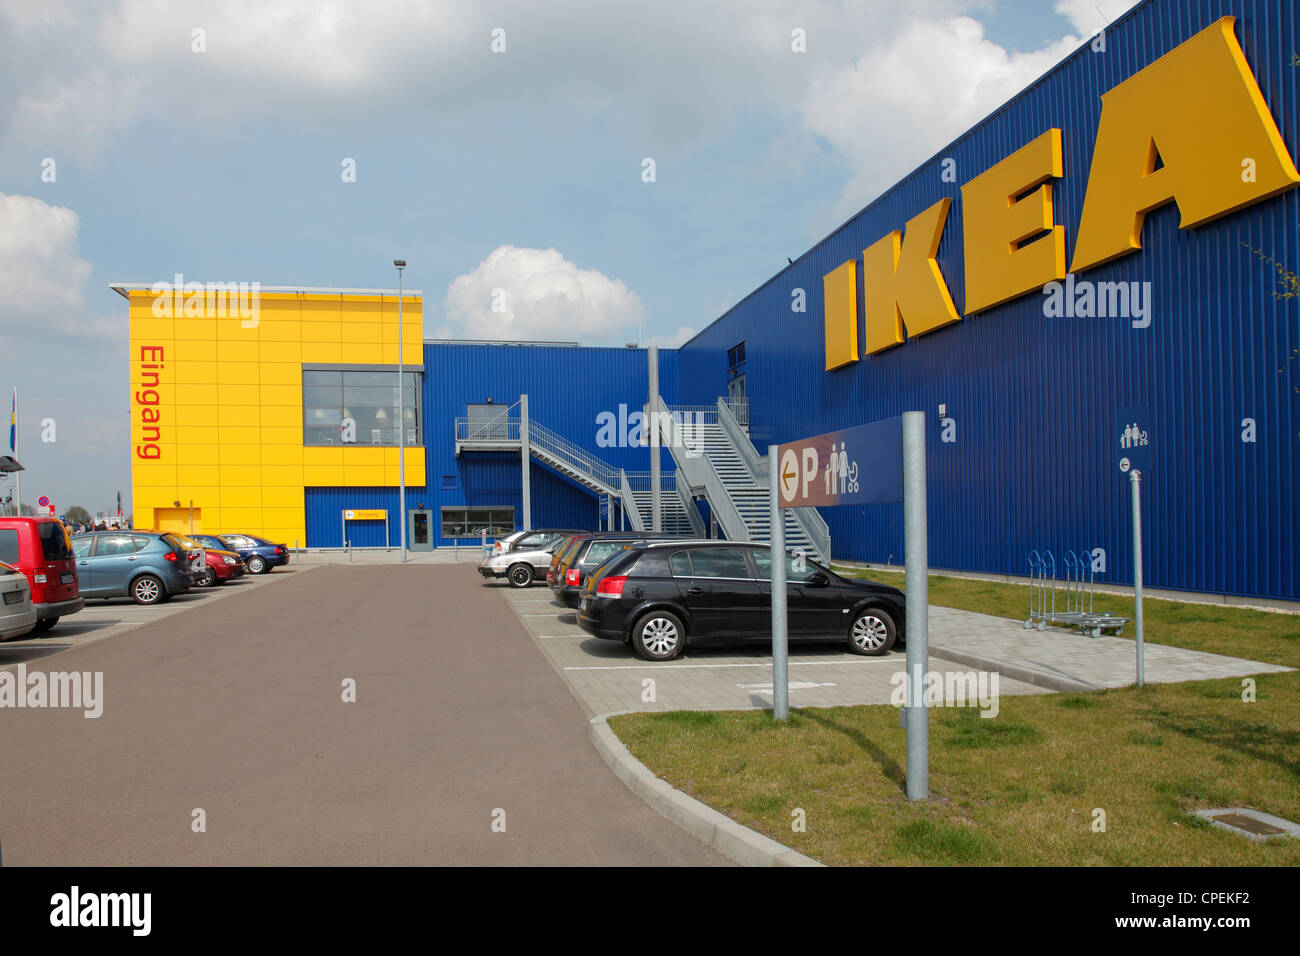 Ikea germany hi-res stock photography and images - Alamy